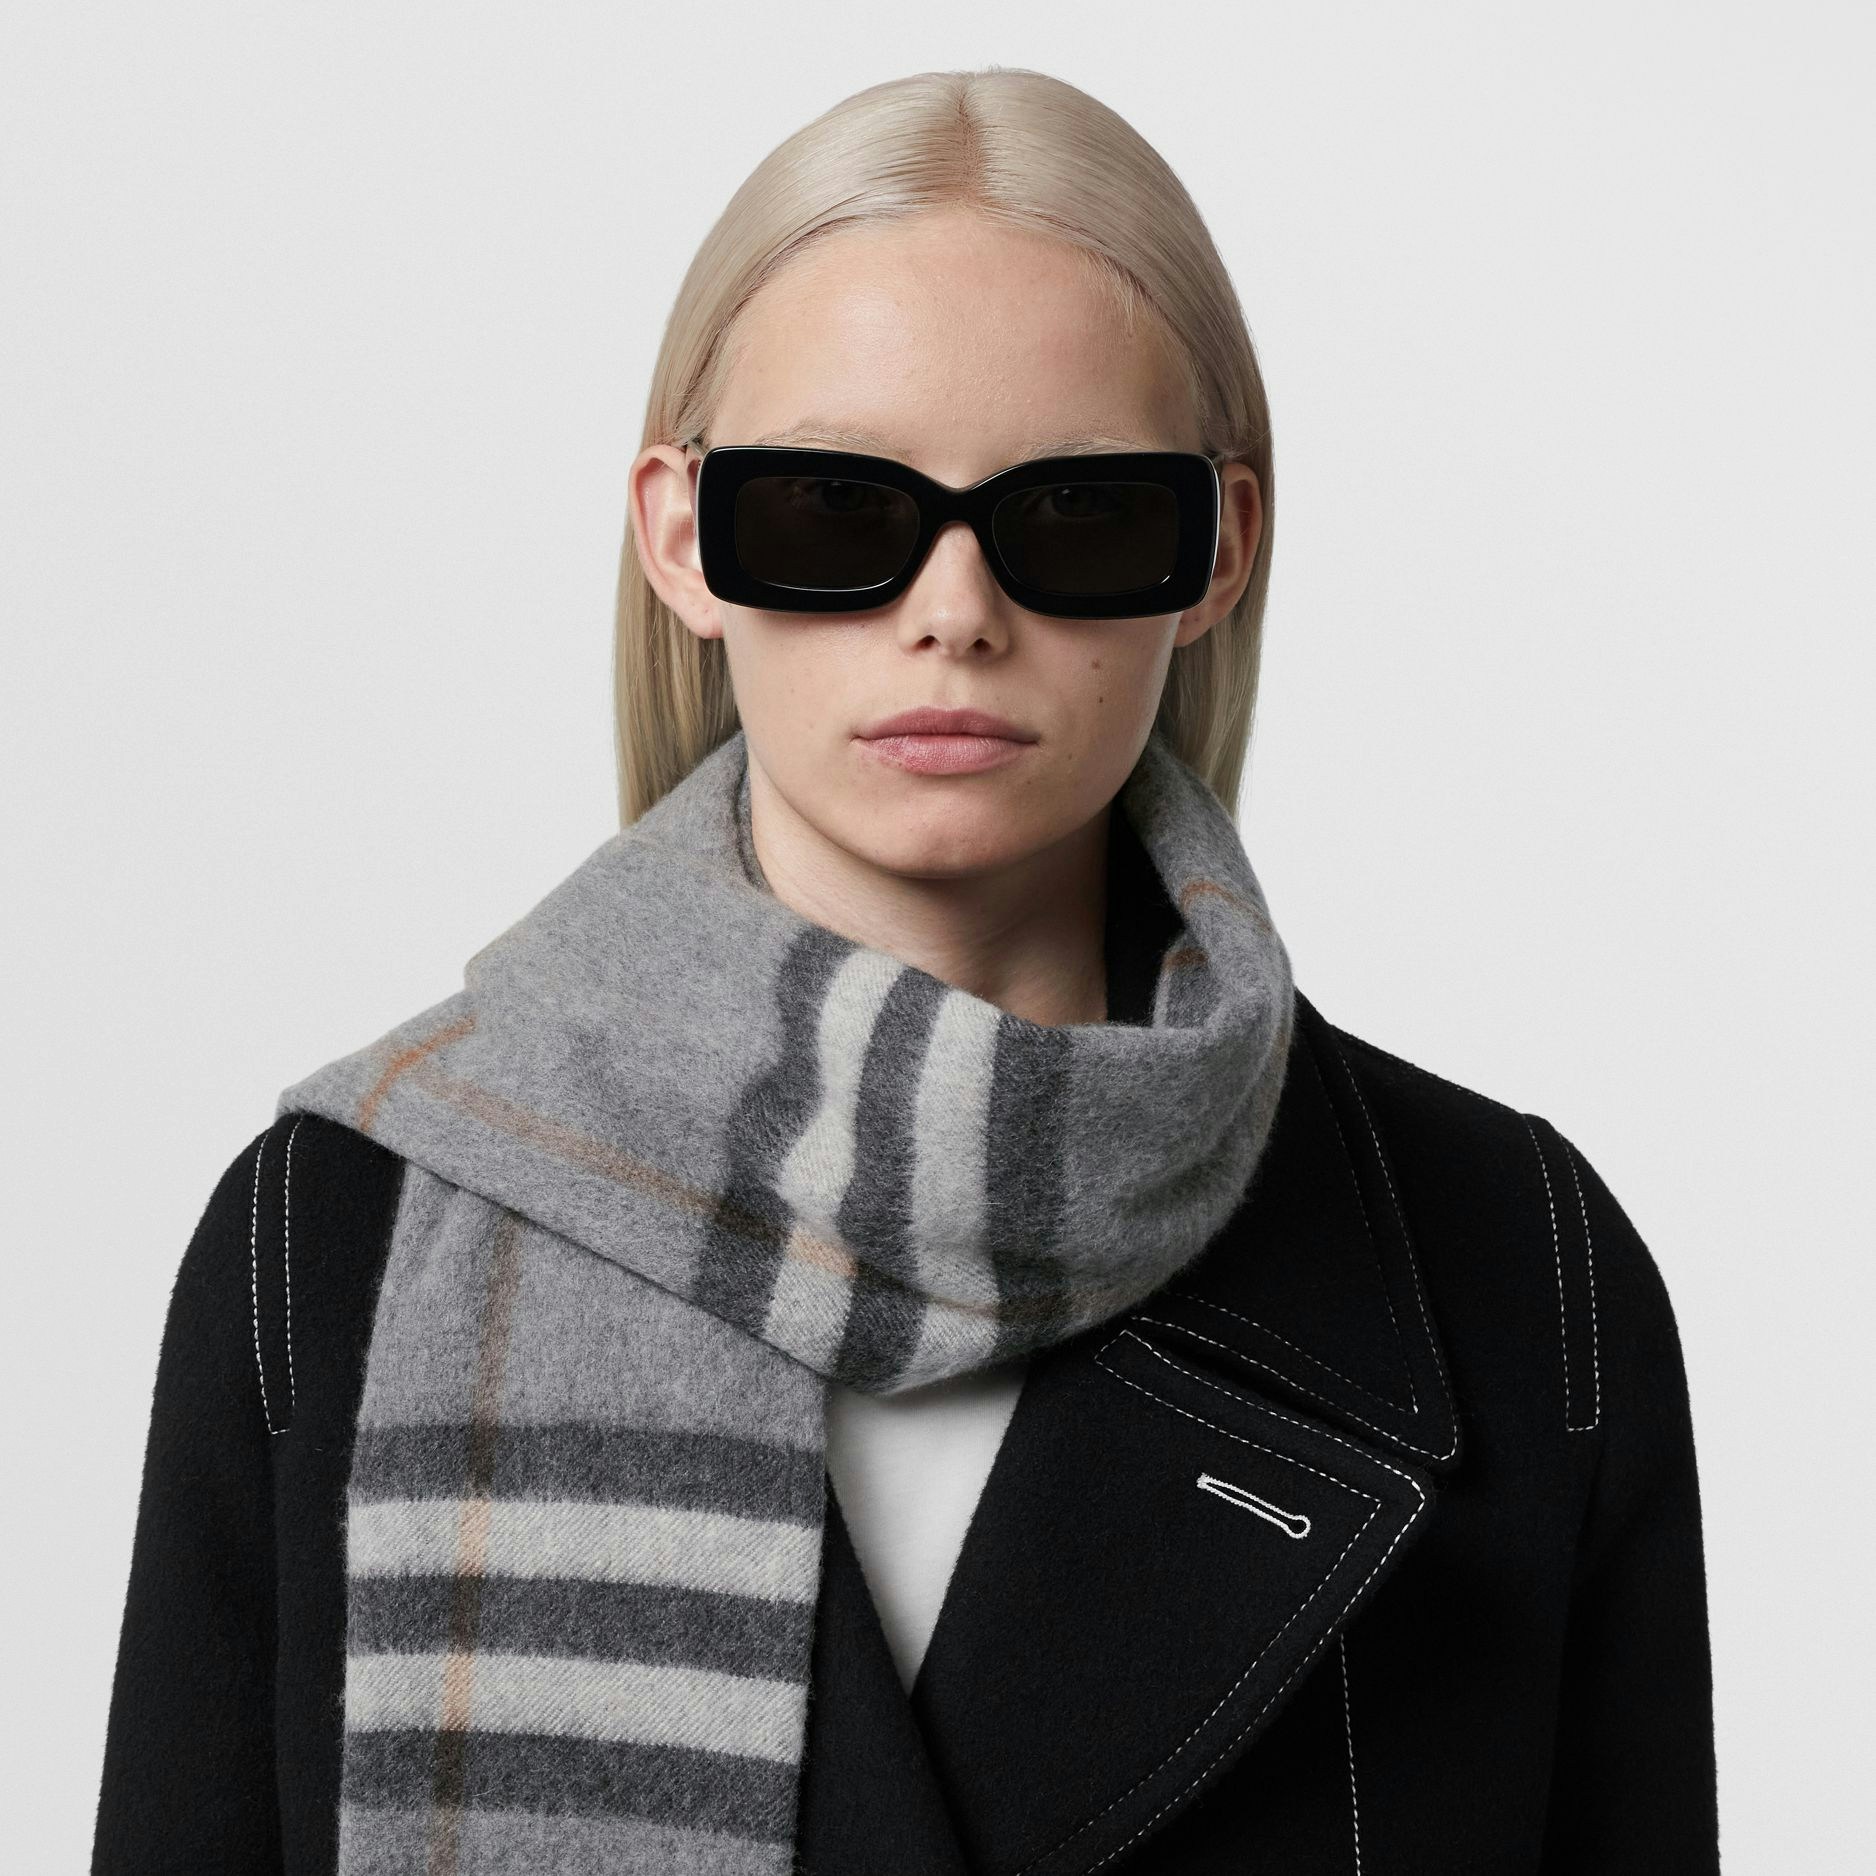 The Classic Check Cashmere Scarf £370